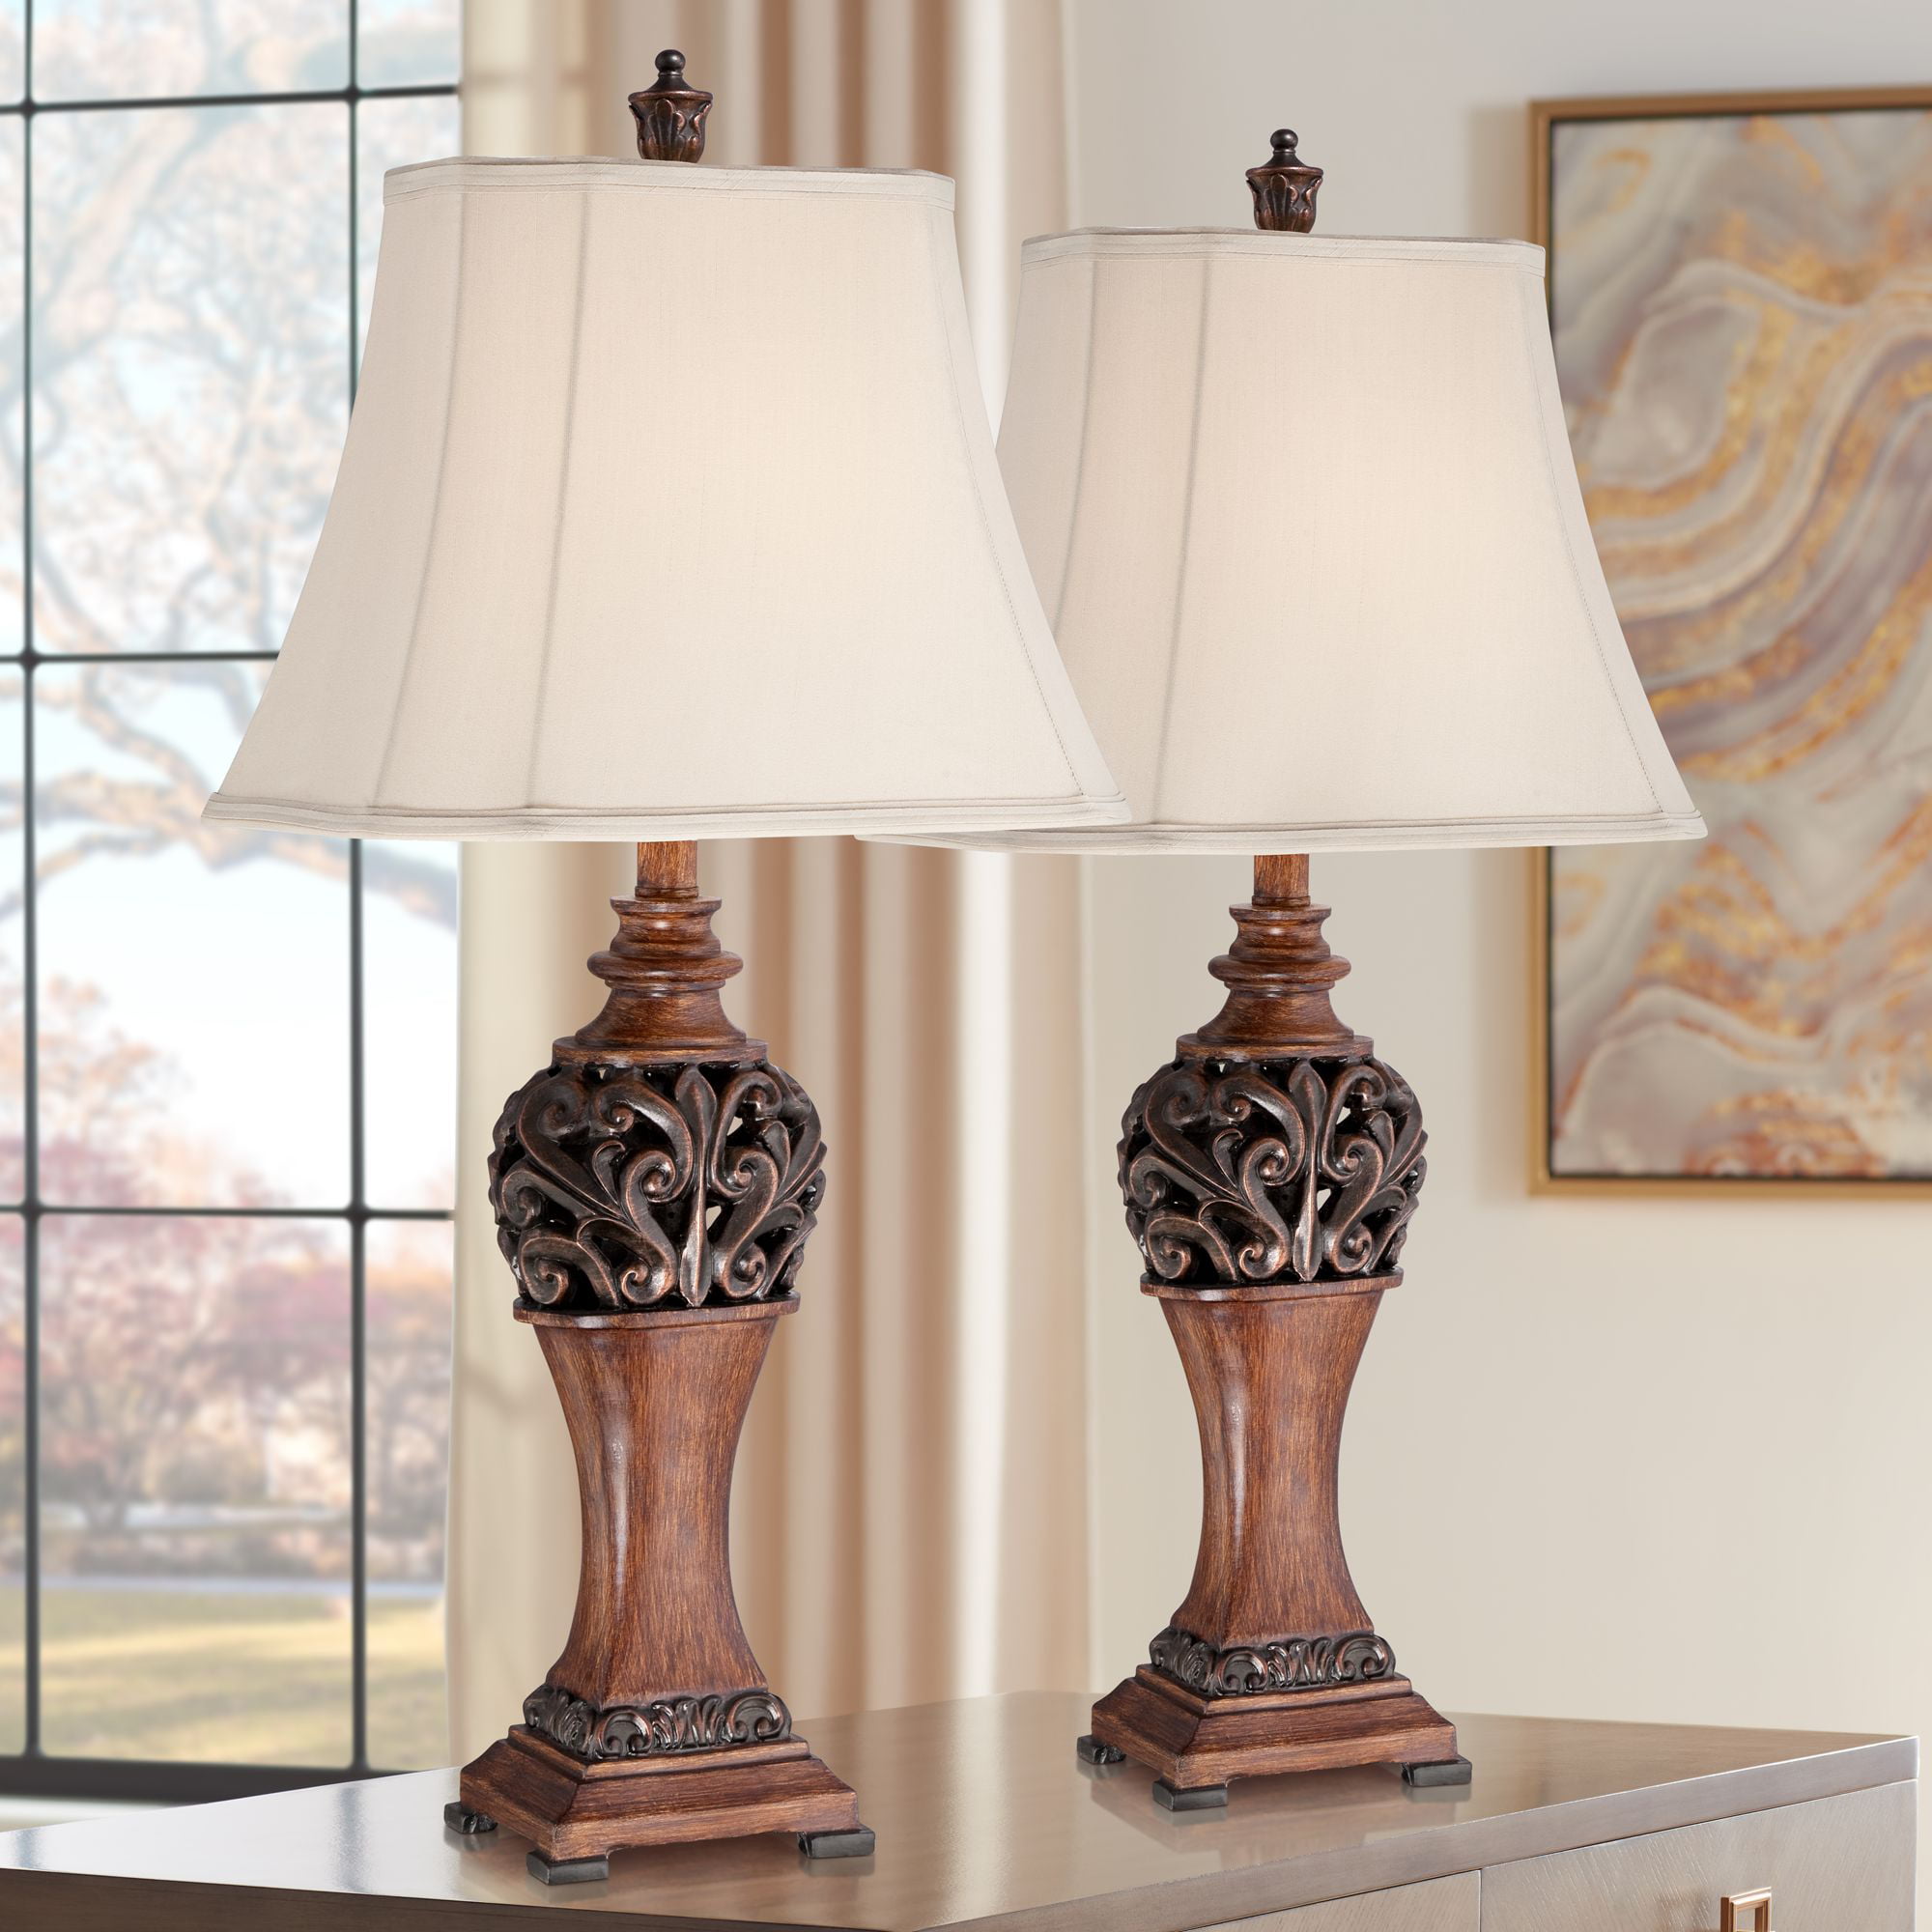 Regency Hill Traditional Table Lamps, Carved Wood Table Lamp Base